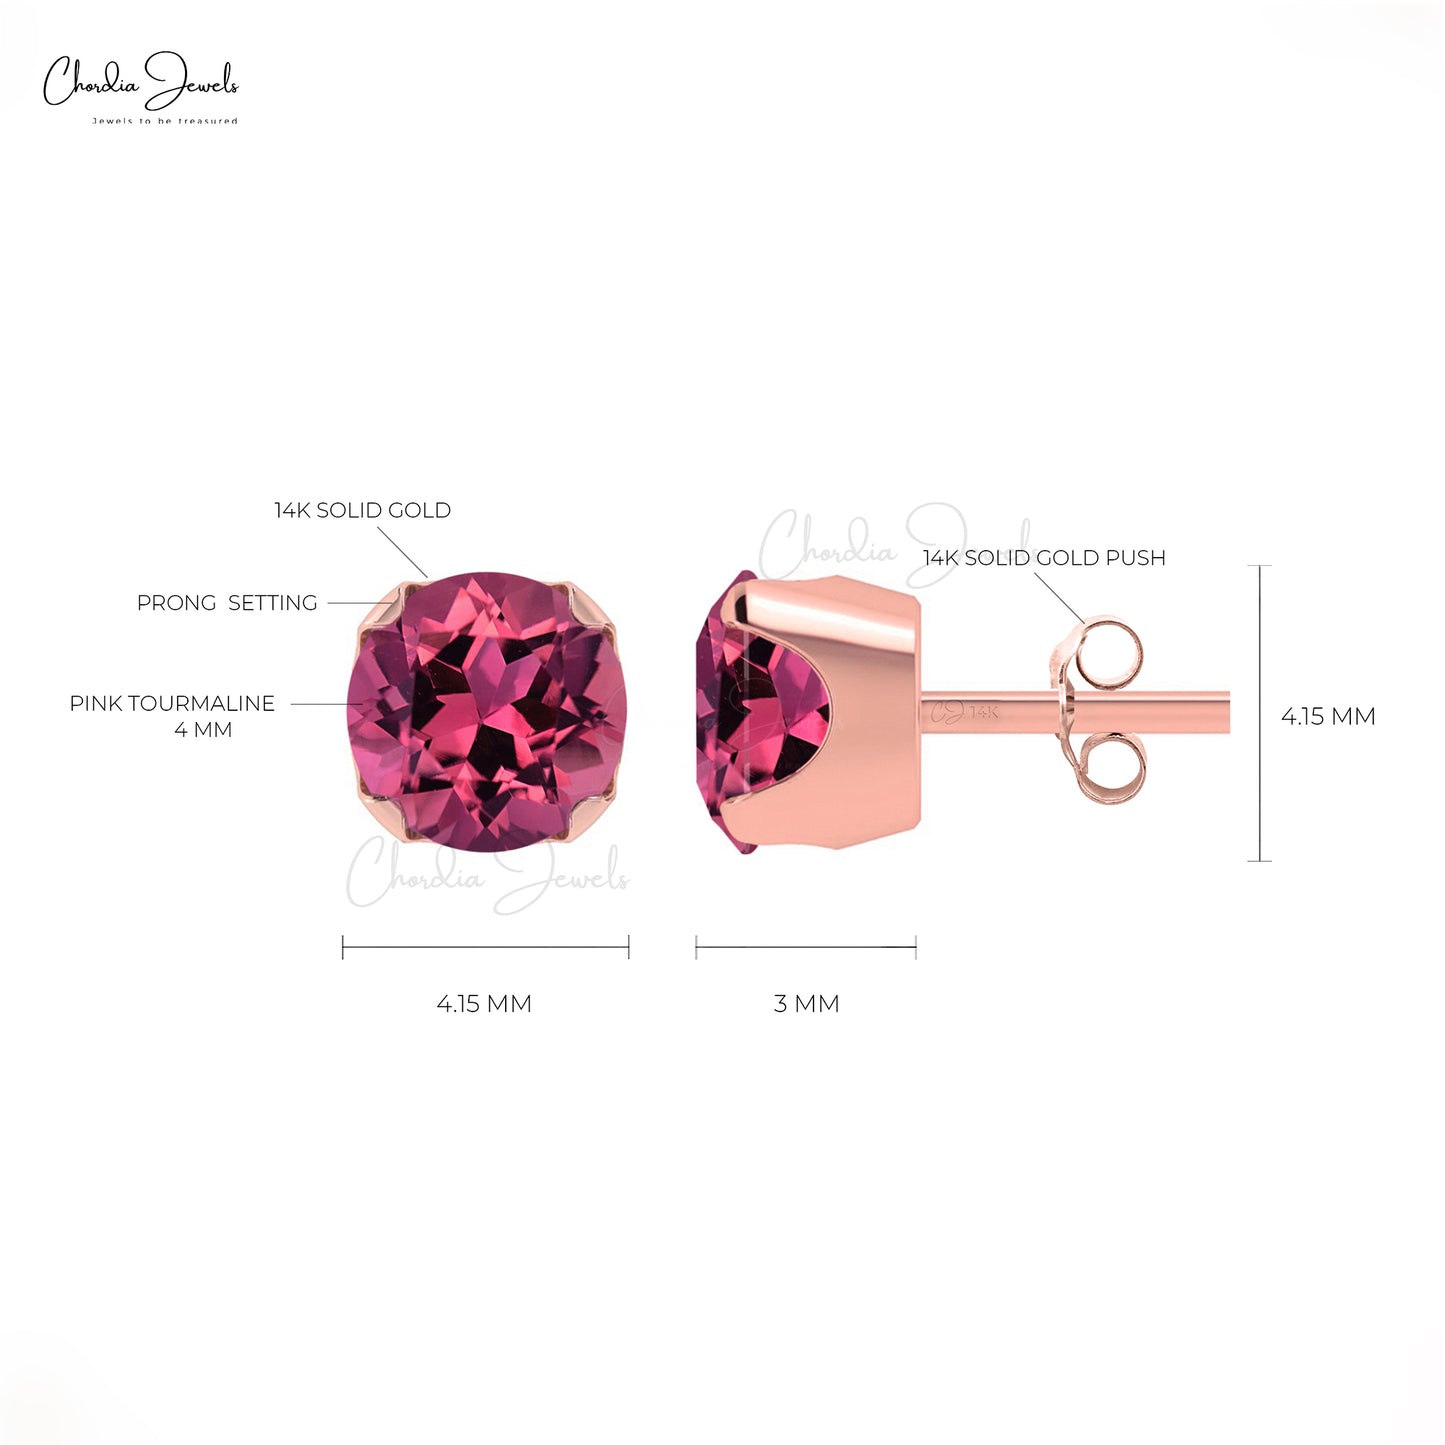 Genuine Pink Tourmaline 4mm Round Cut Gemstone Studs Earring 14k Solid Gold Studs For Her